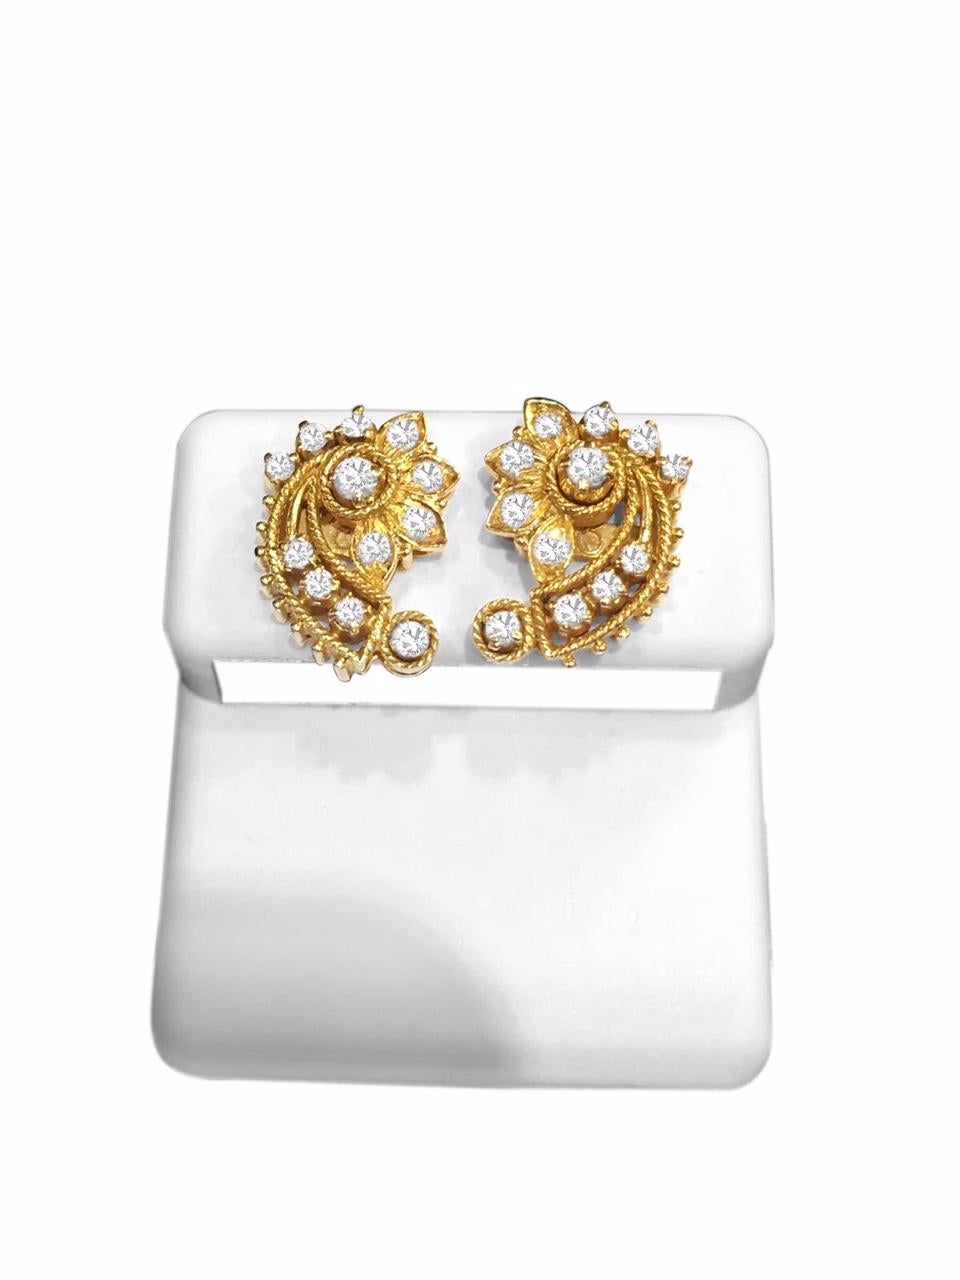 Fashioned from 18K yellow gold, these earrings feature 1.14 carats of round brilliant cut diamonds with VS clarity and F-G color. Their design exudes an elegant Asian/Indian style, adding a touch of sophistication to any ensemble.

Key